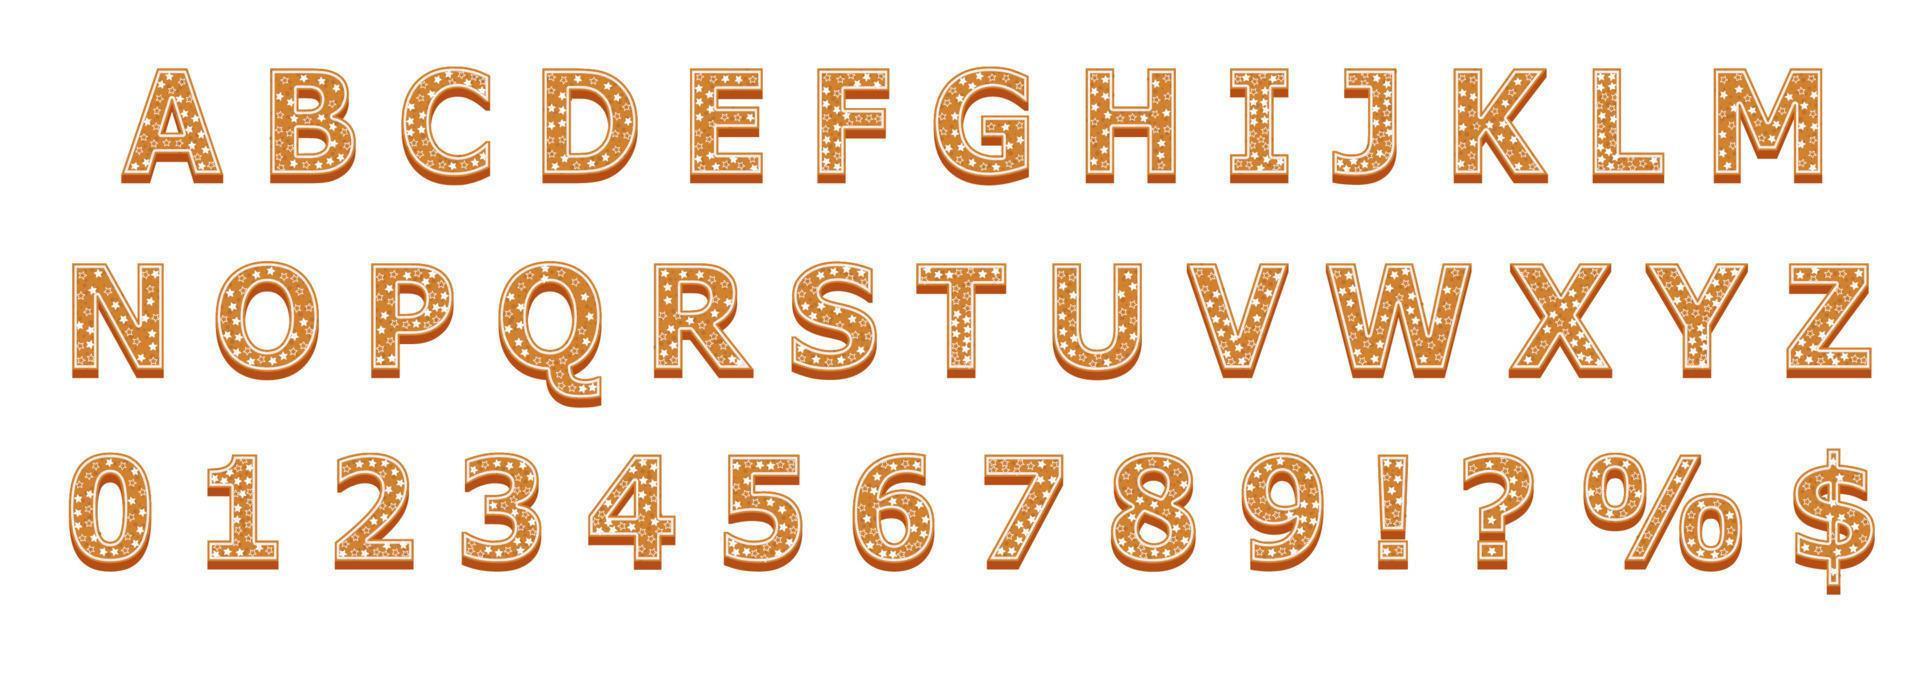 Christmas or New Year alphabet cookies set with glaze vector illustration. Isolated textured letters on white background.